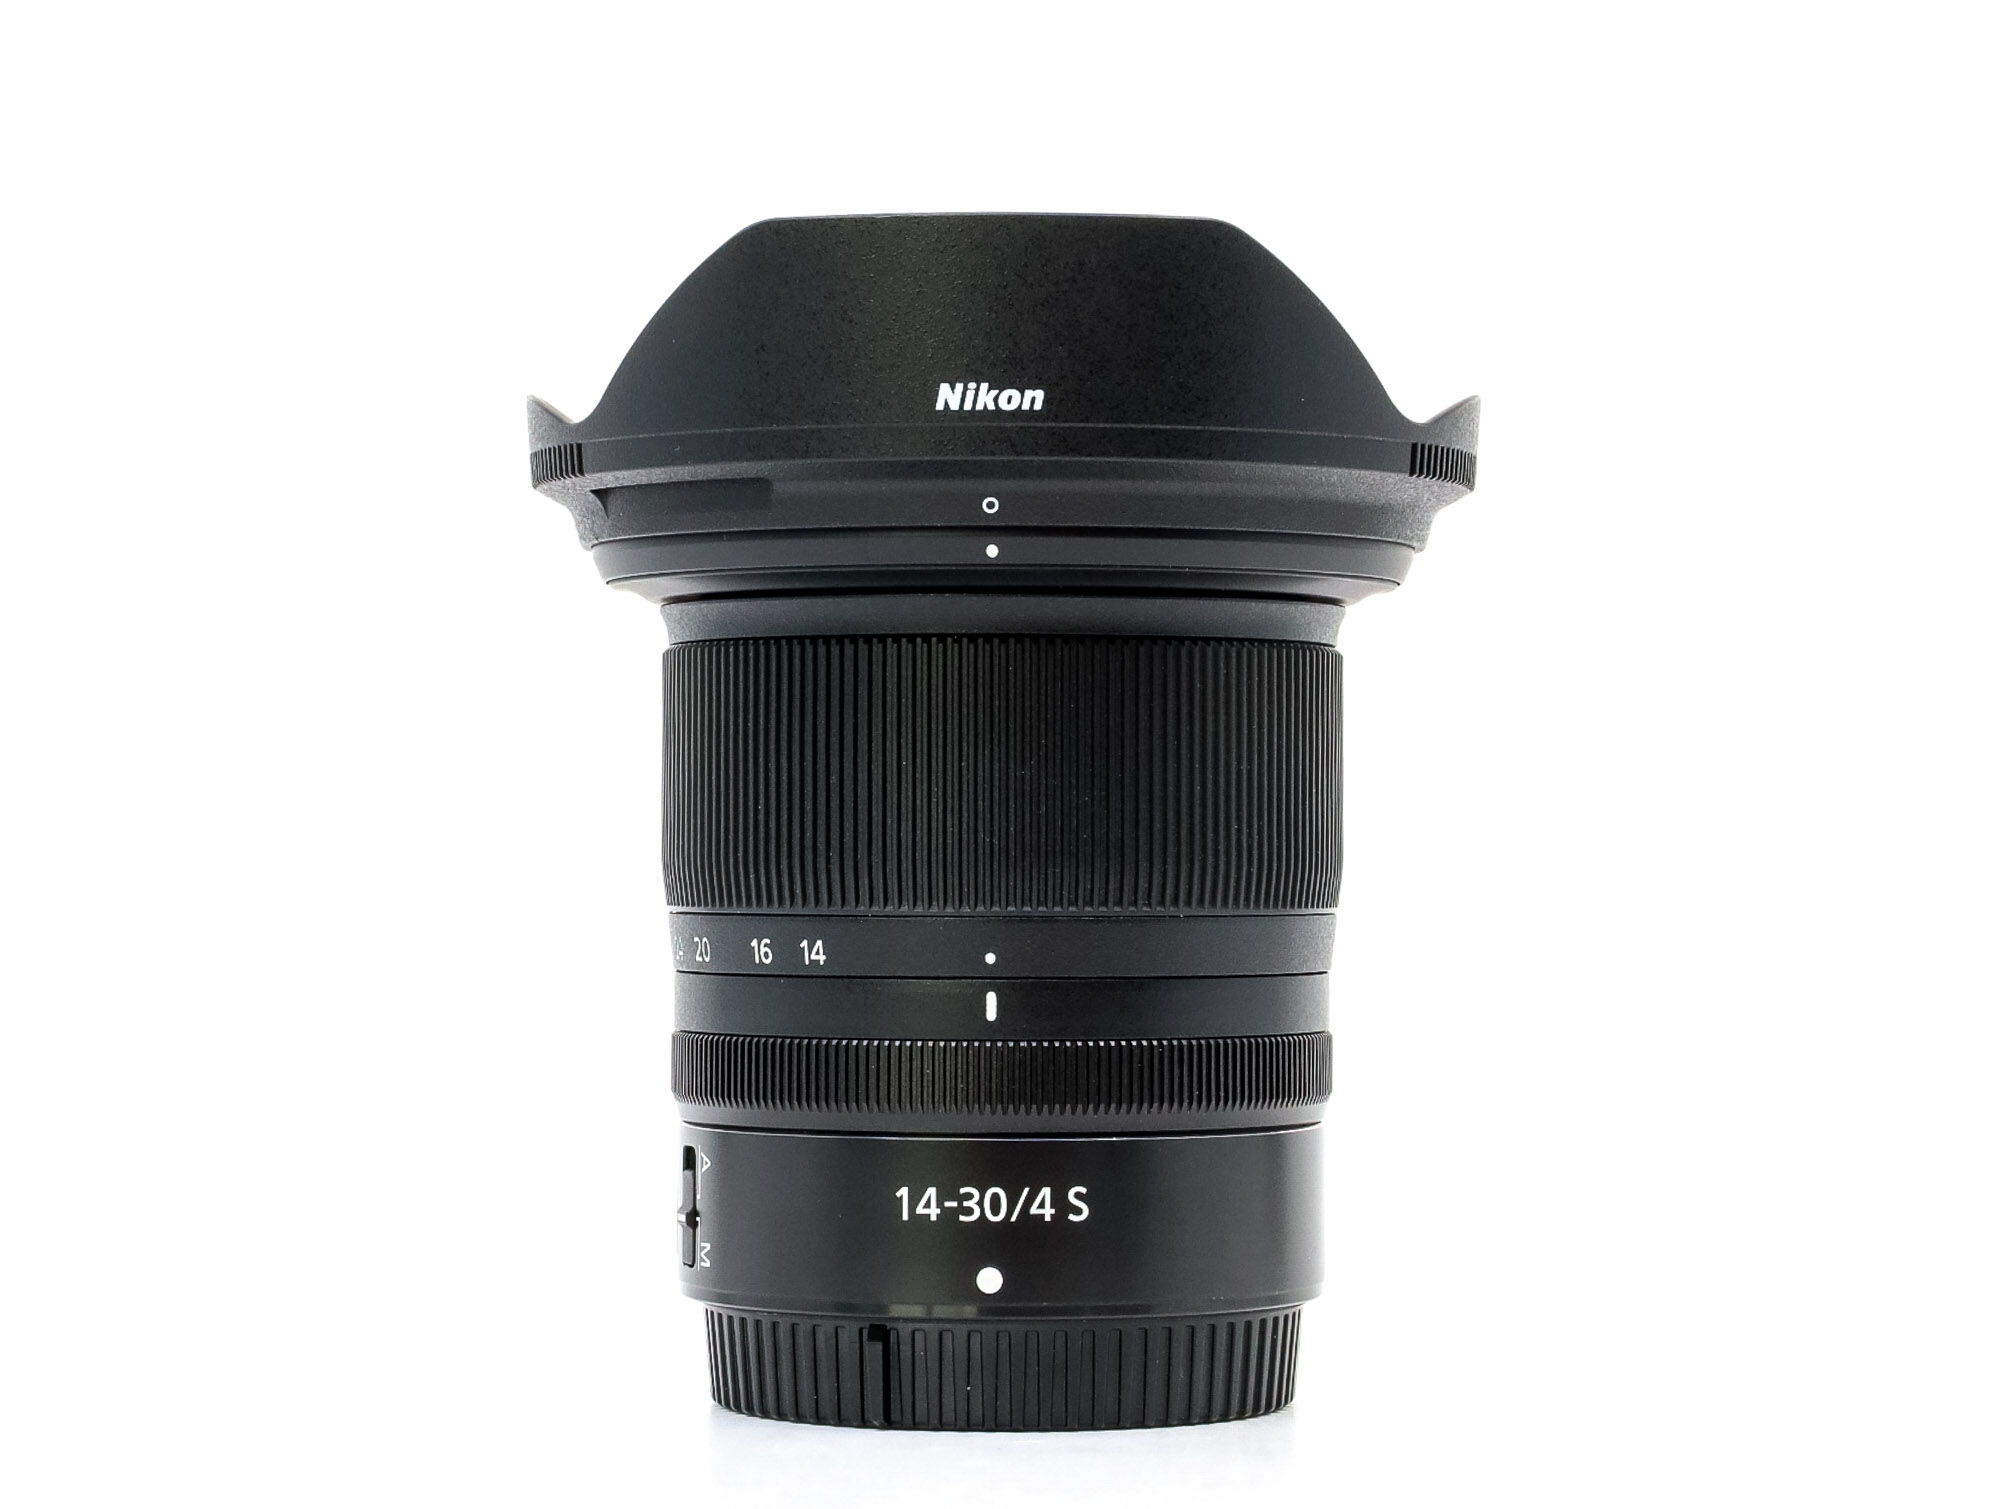 nikon nikkor z 14-30mm f/4 s (condition: like new)